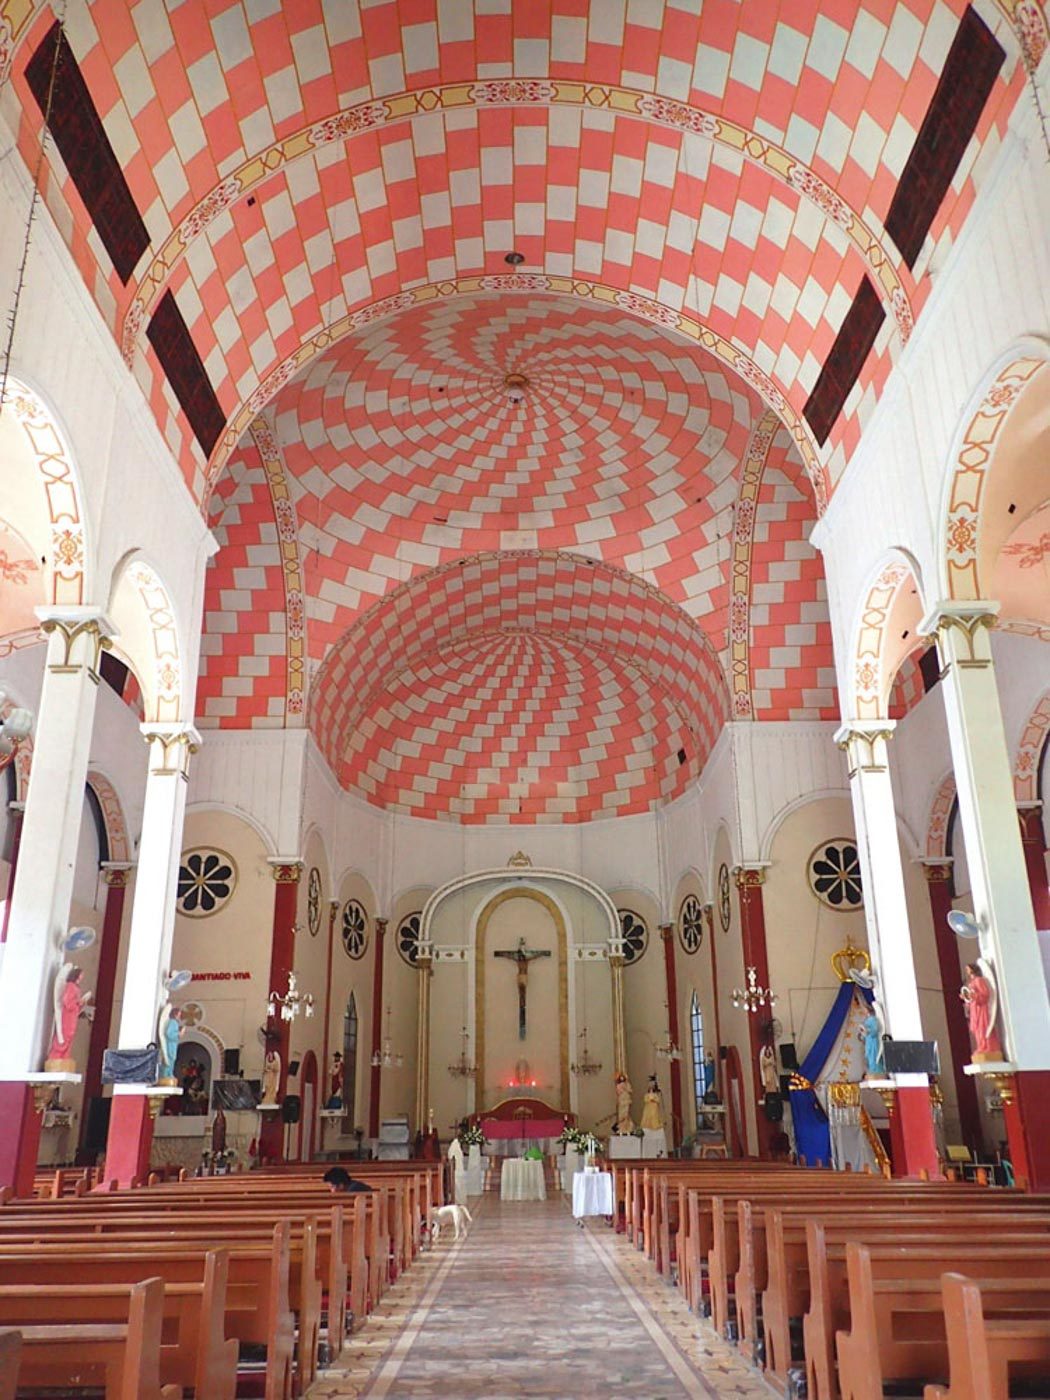 INTERIORS. Rizal once painted the backdrop for the altar at St. James Church, but it was later destroyed by a fire. 